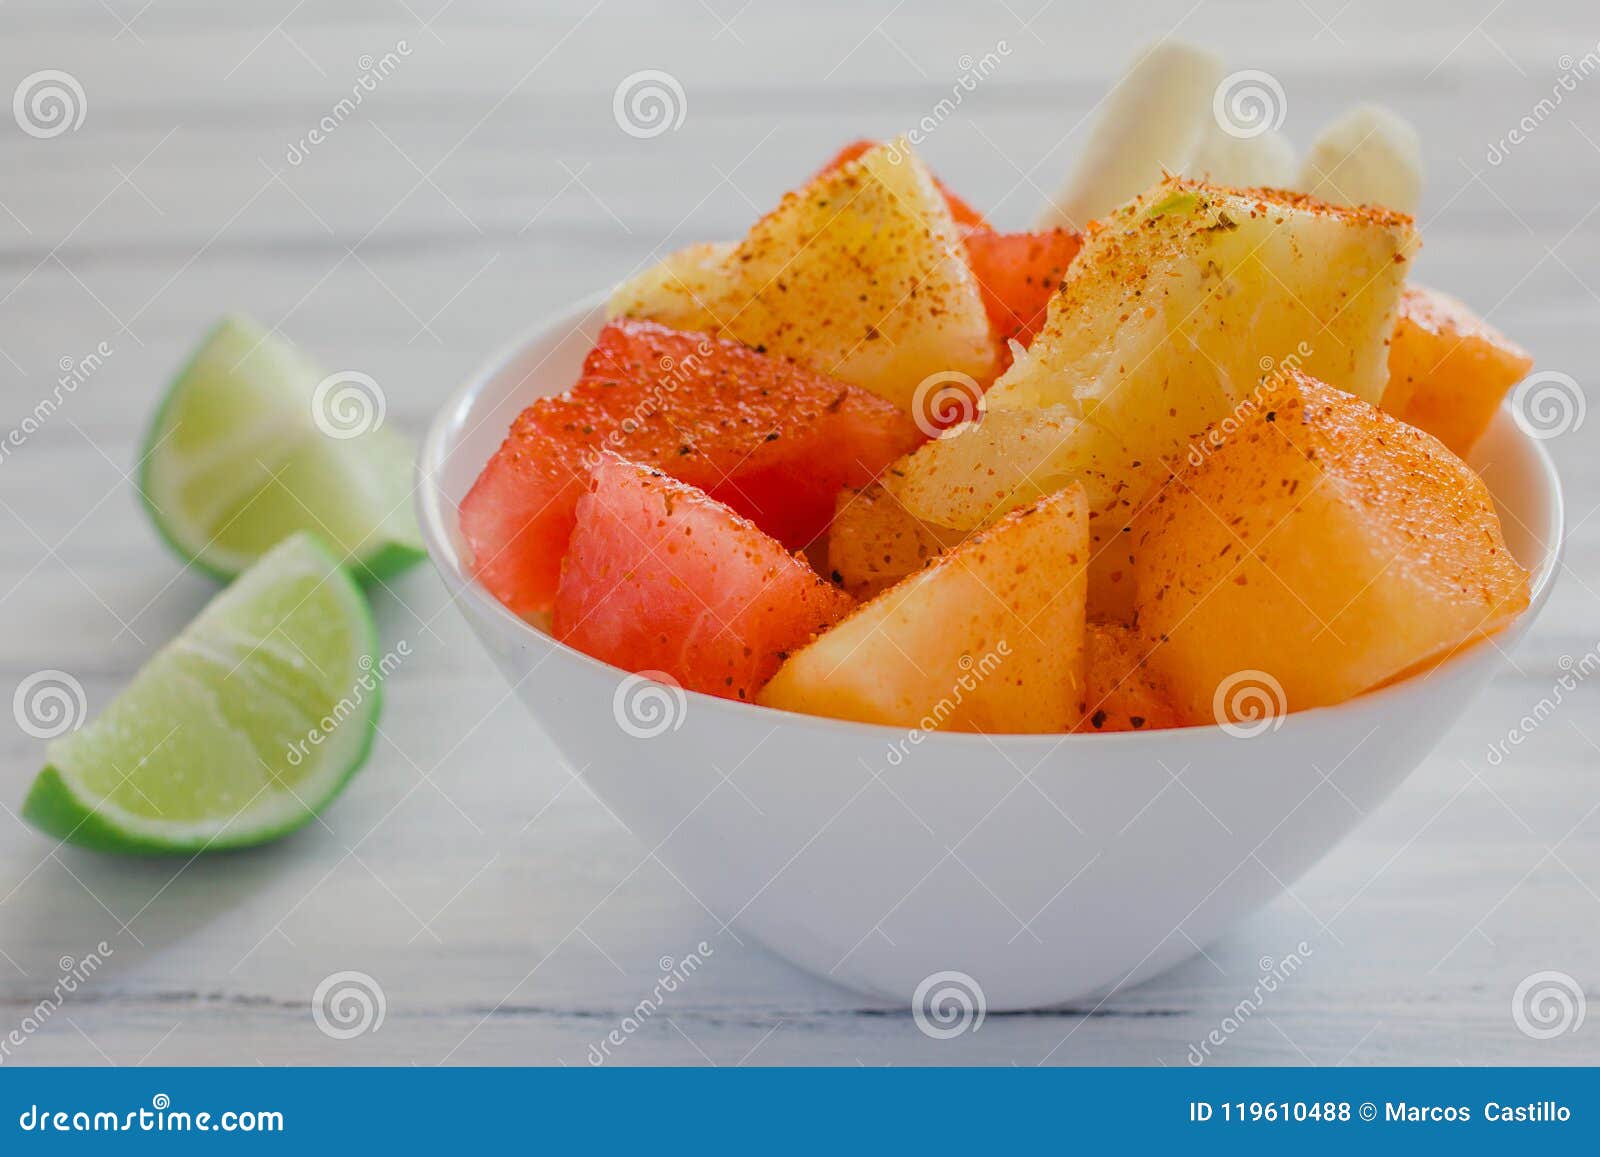 fruta con chile, mexican snack bowl of healthy fresh fruit salad